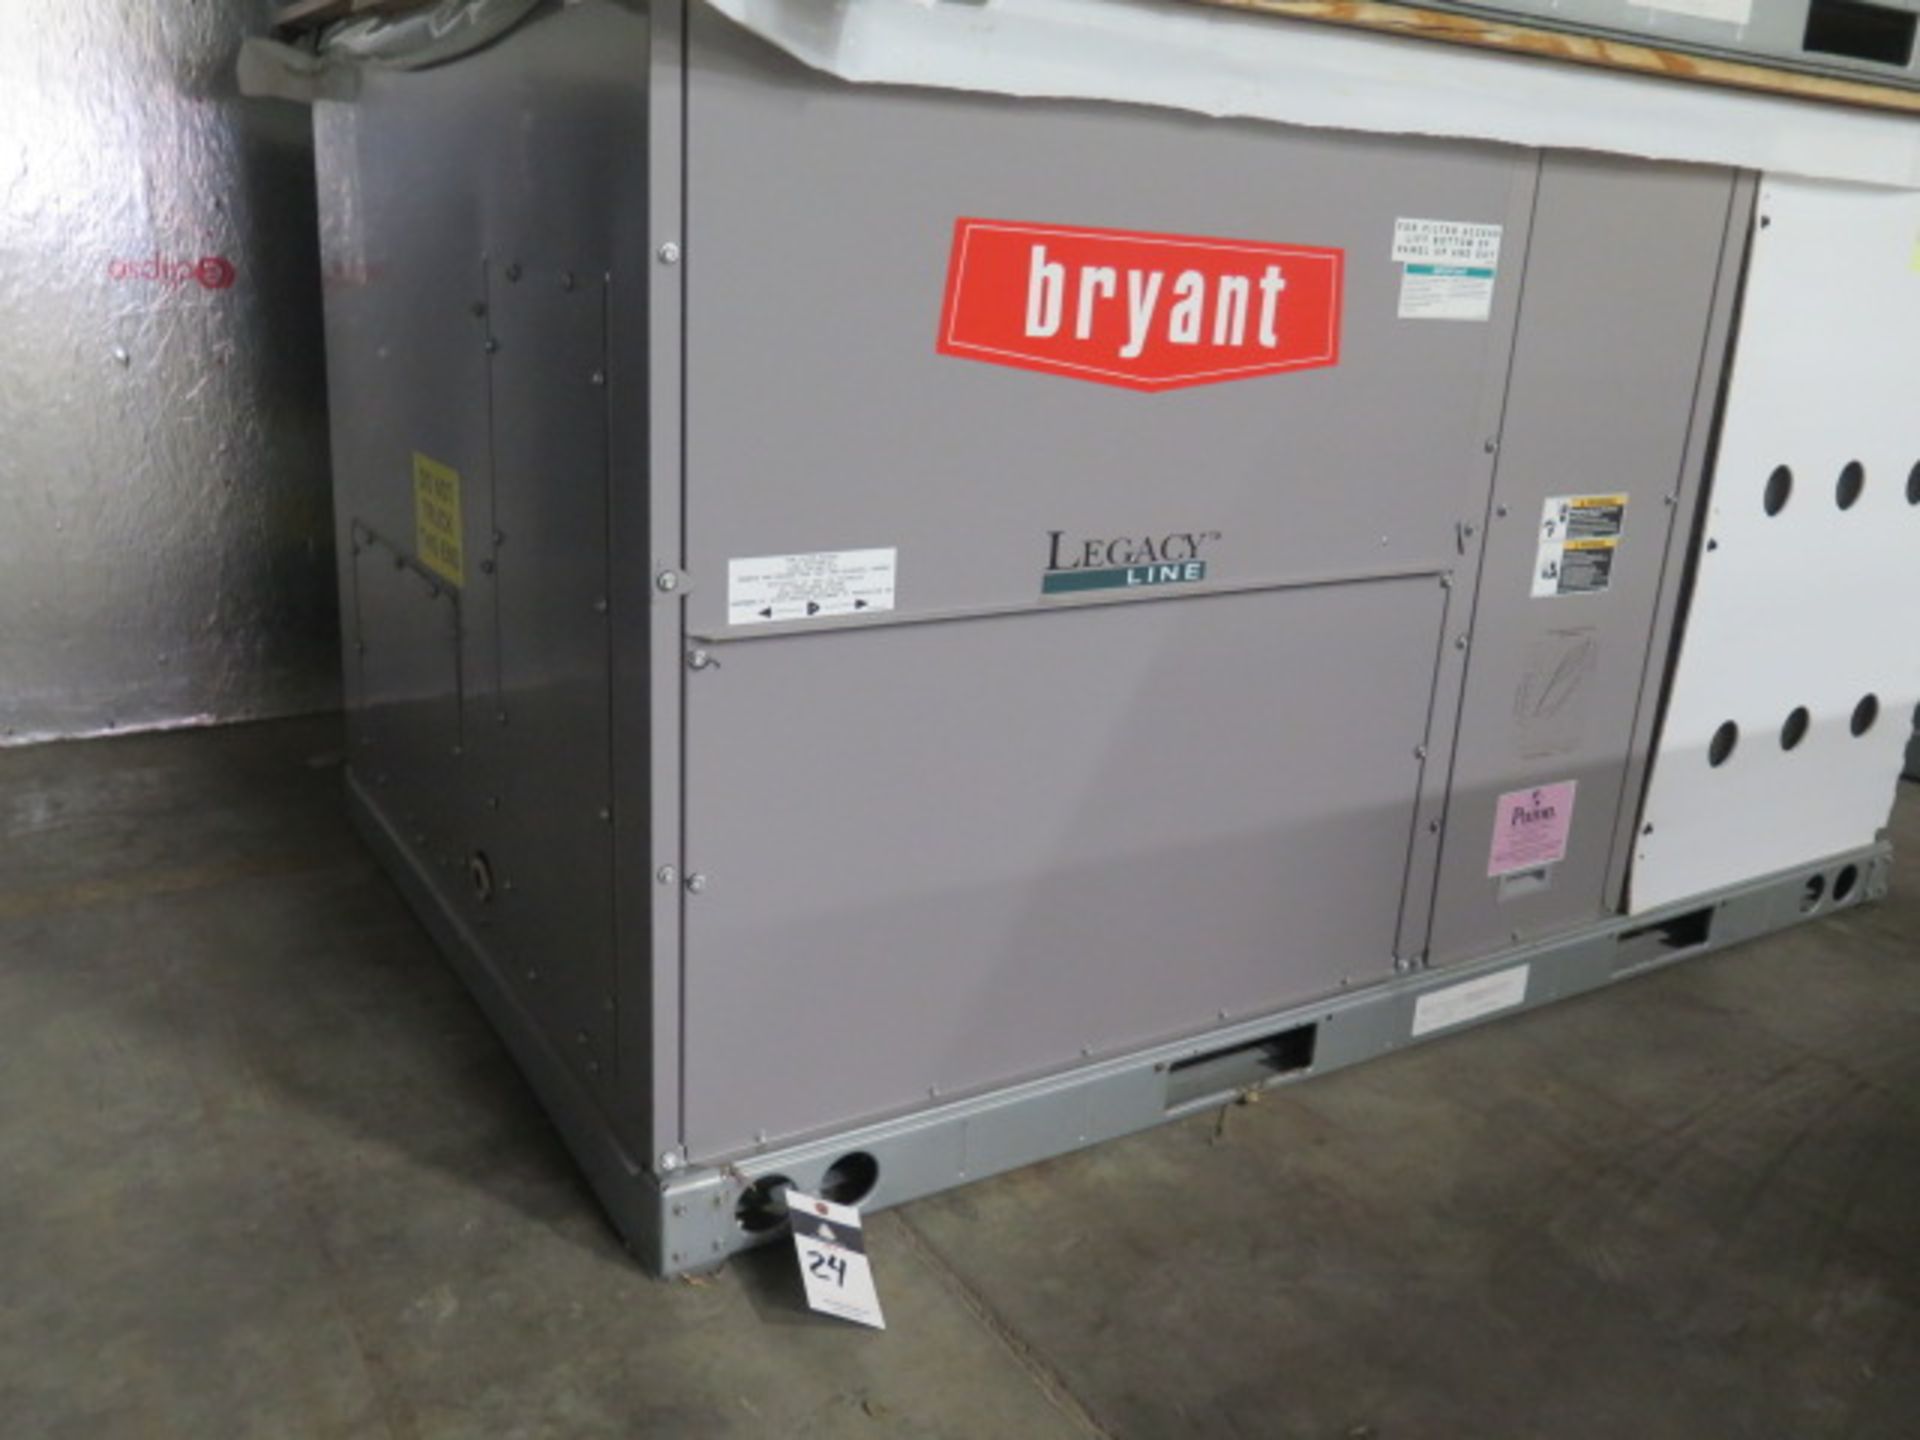 Bryant “Legacy Line” 547JE06A000A2A0AAA 5 Ton Heat Pump 460V-3ph - Image 2 of 5